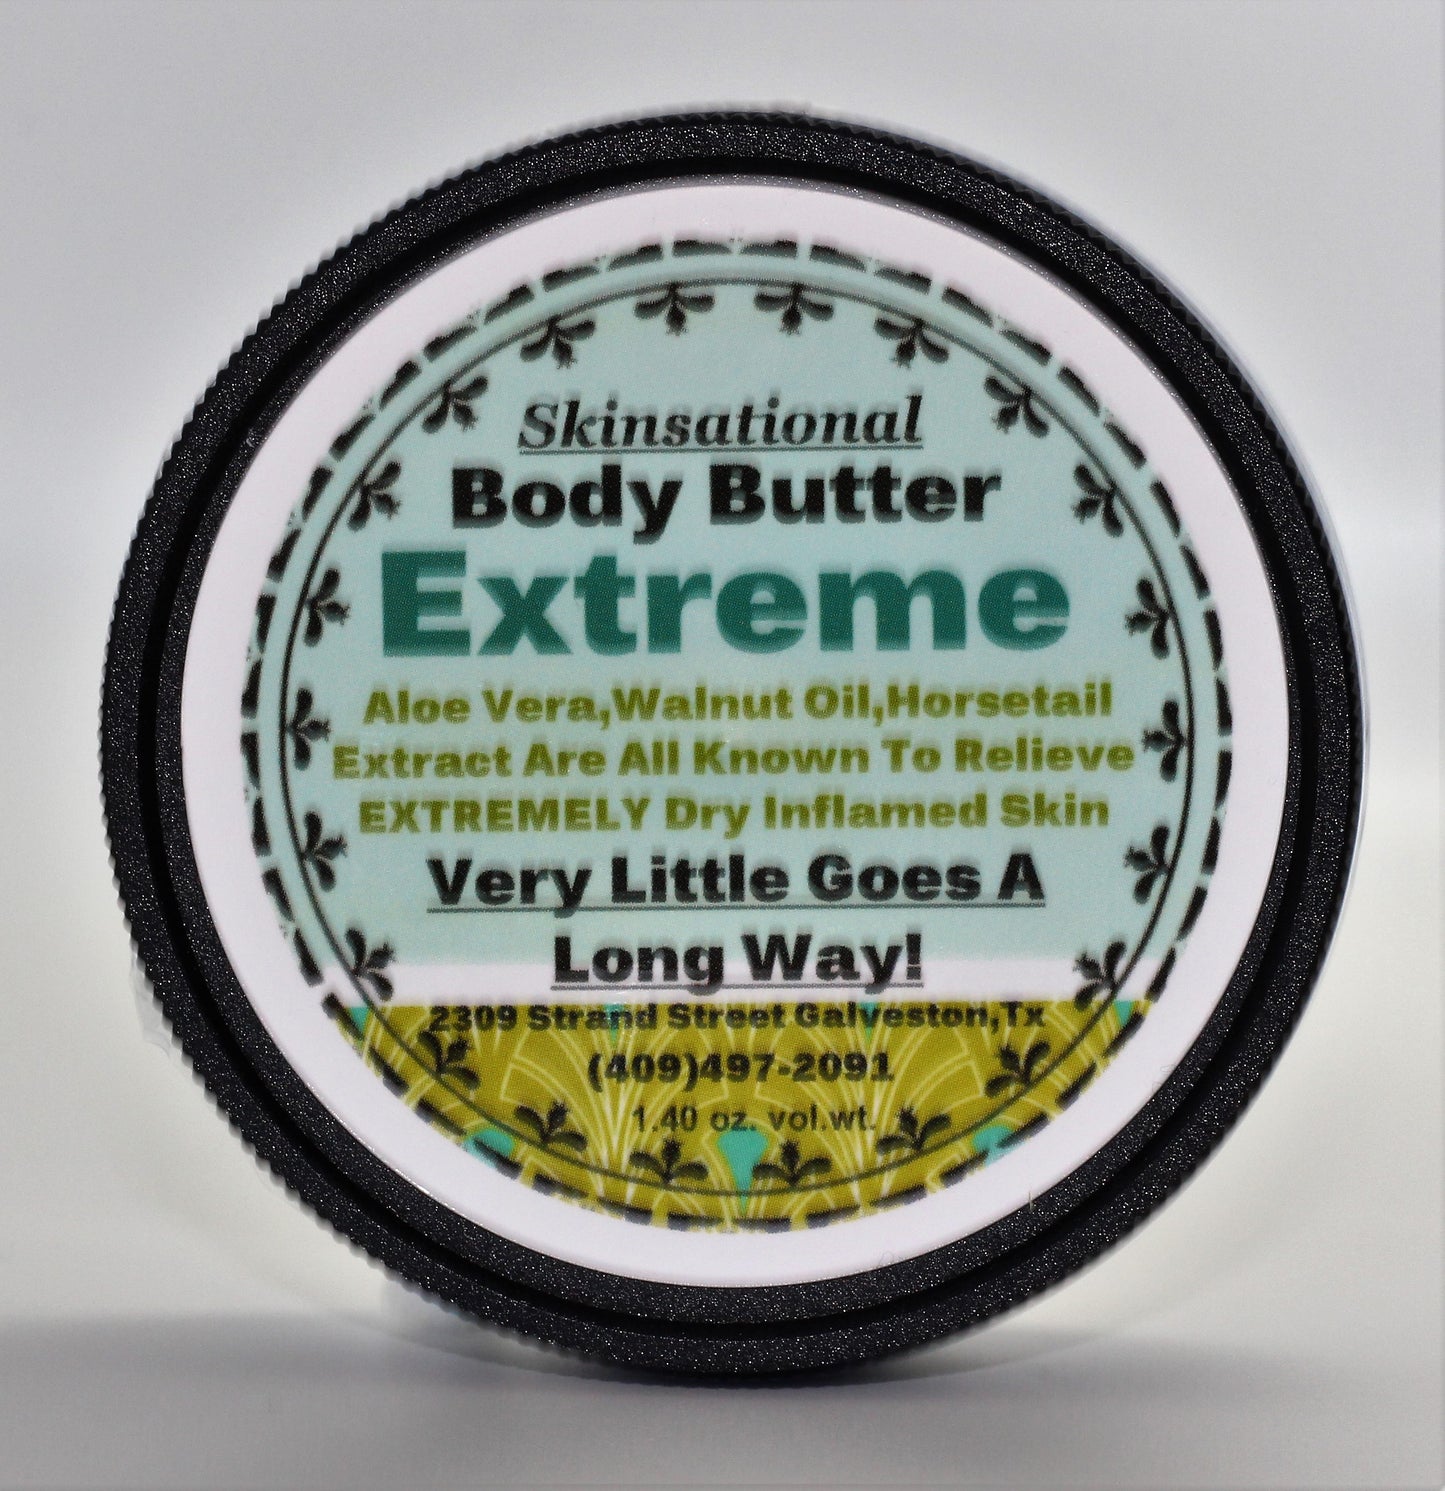 Body Butter Extreme